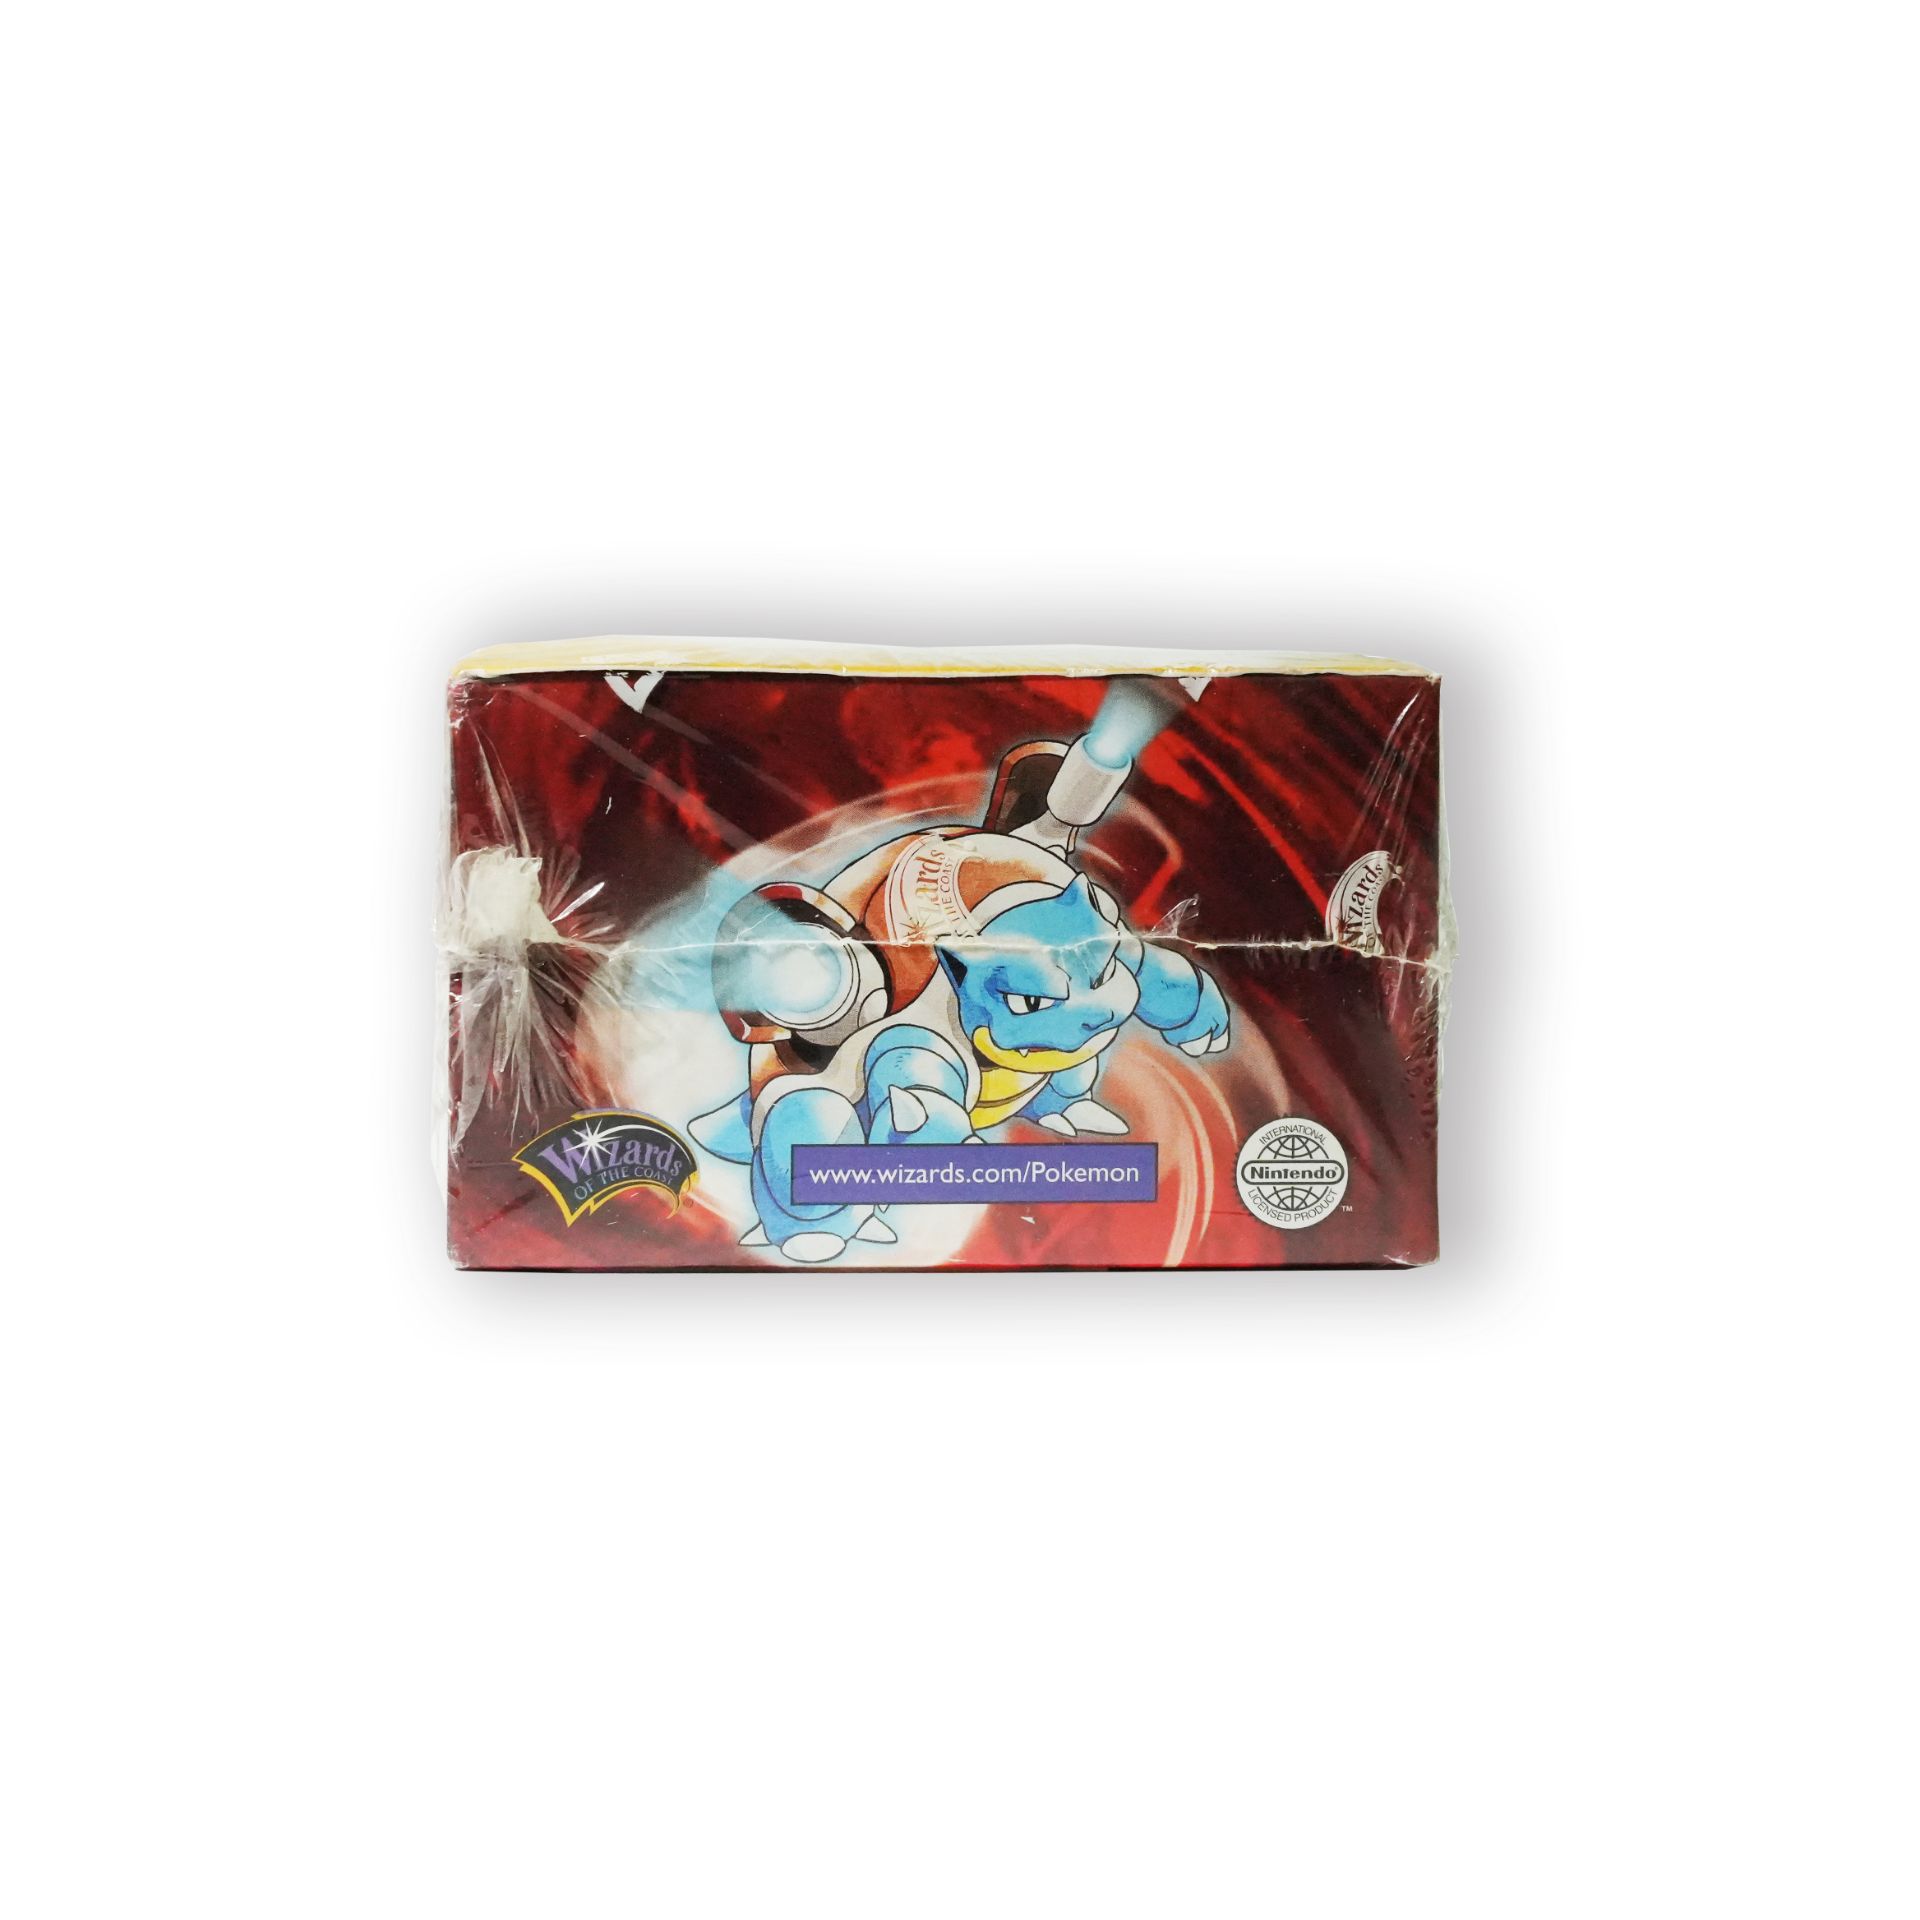 Pokemon TCG - 4th Print Base Set Booster Box - Sealed - This lot contains 1x sealed 4th print base - Image 6 of 6